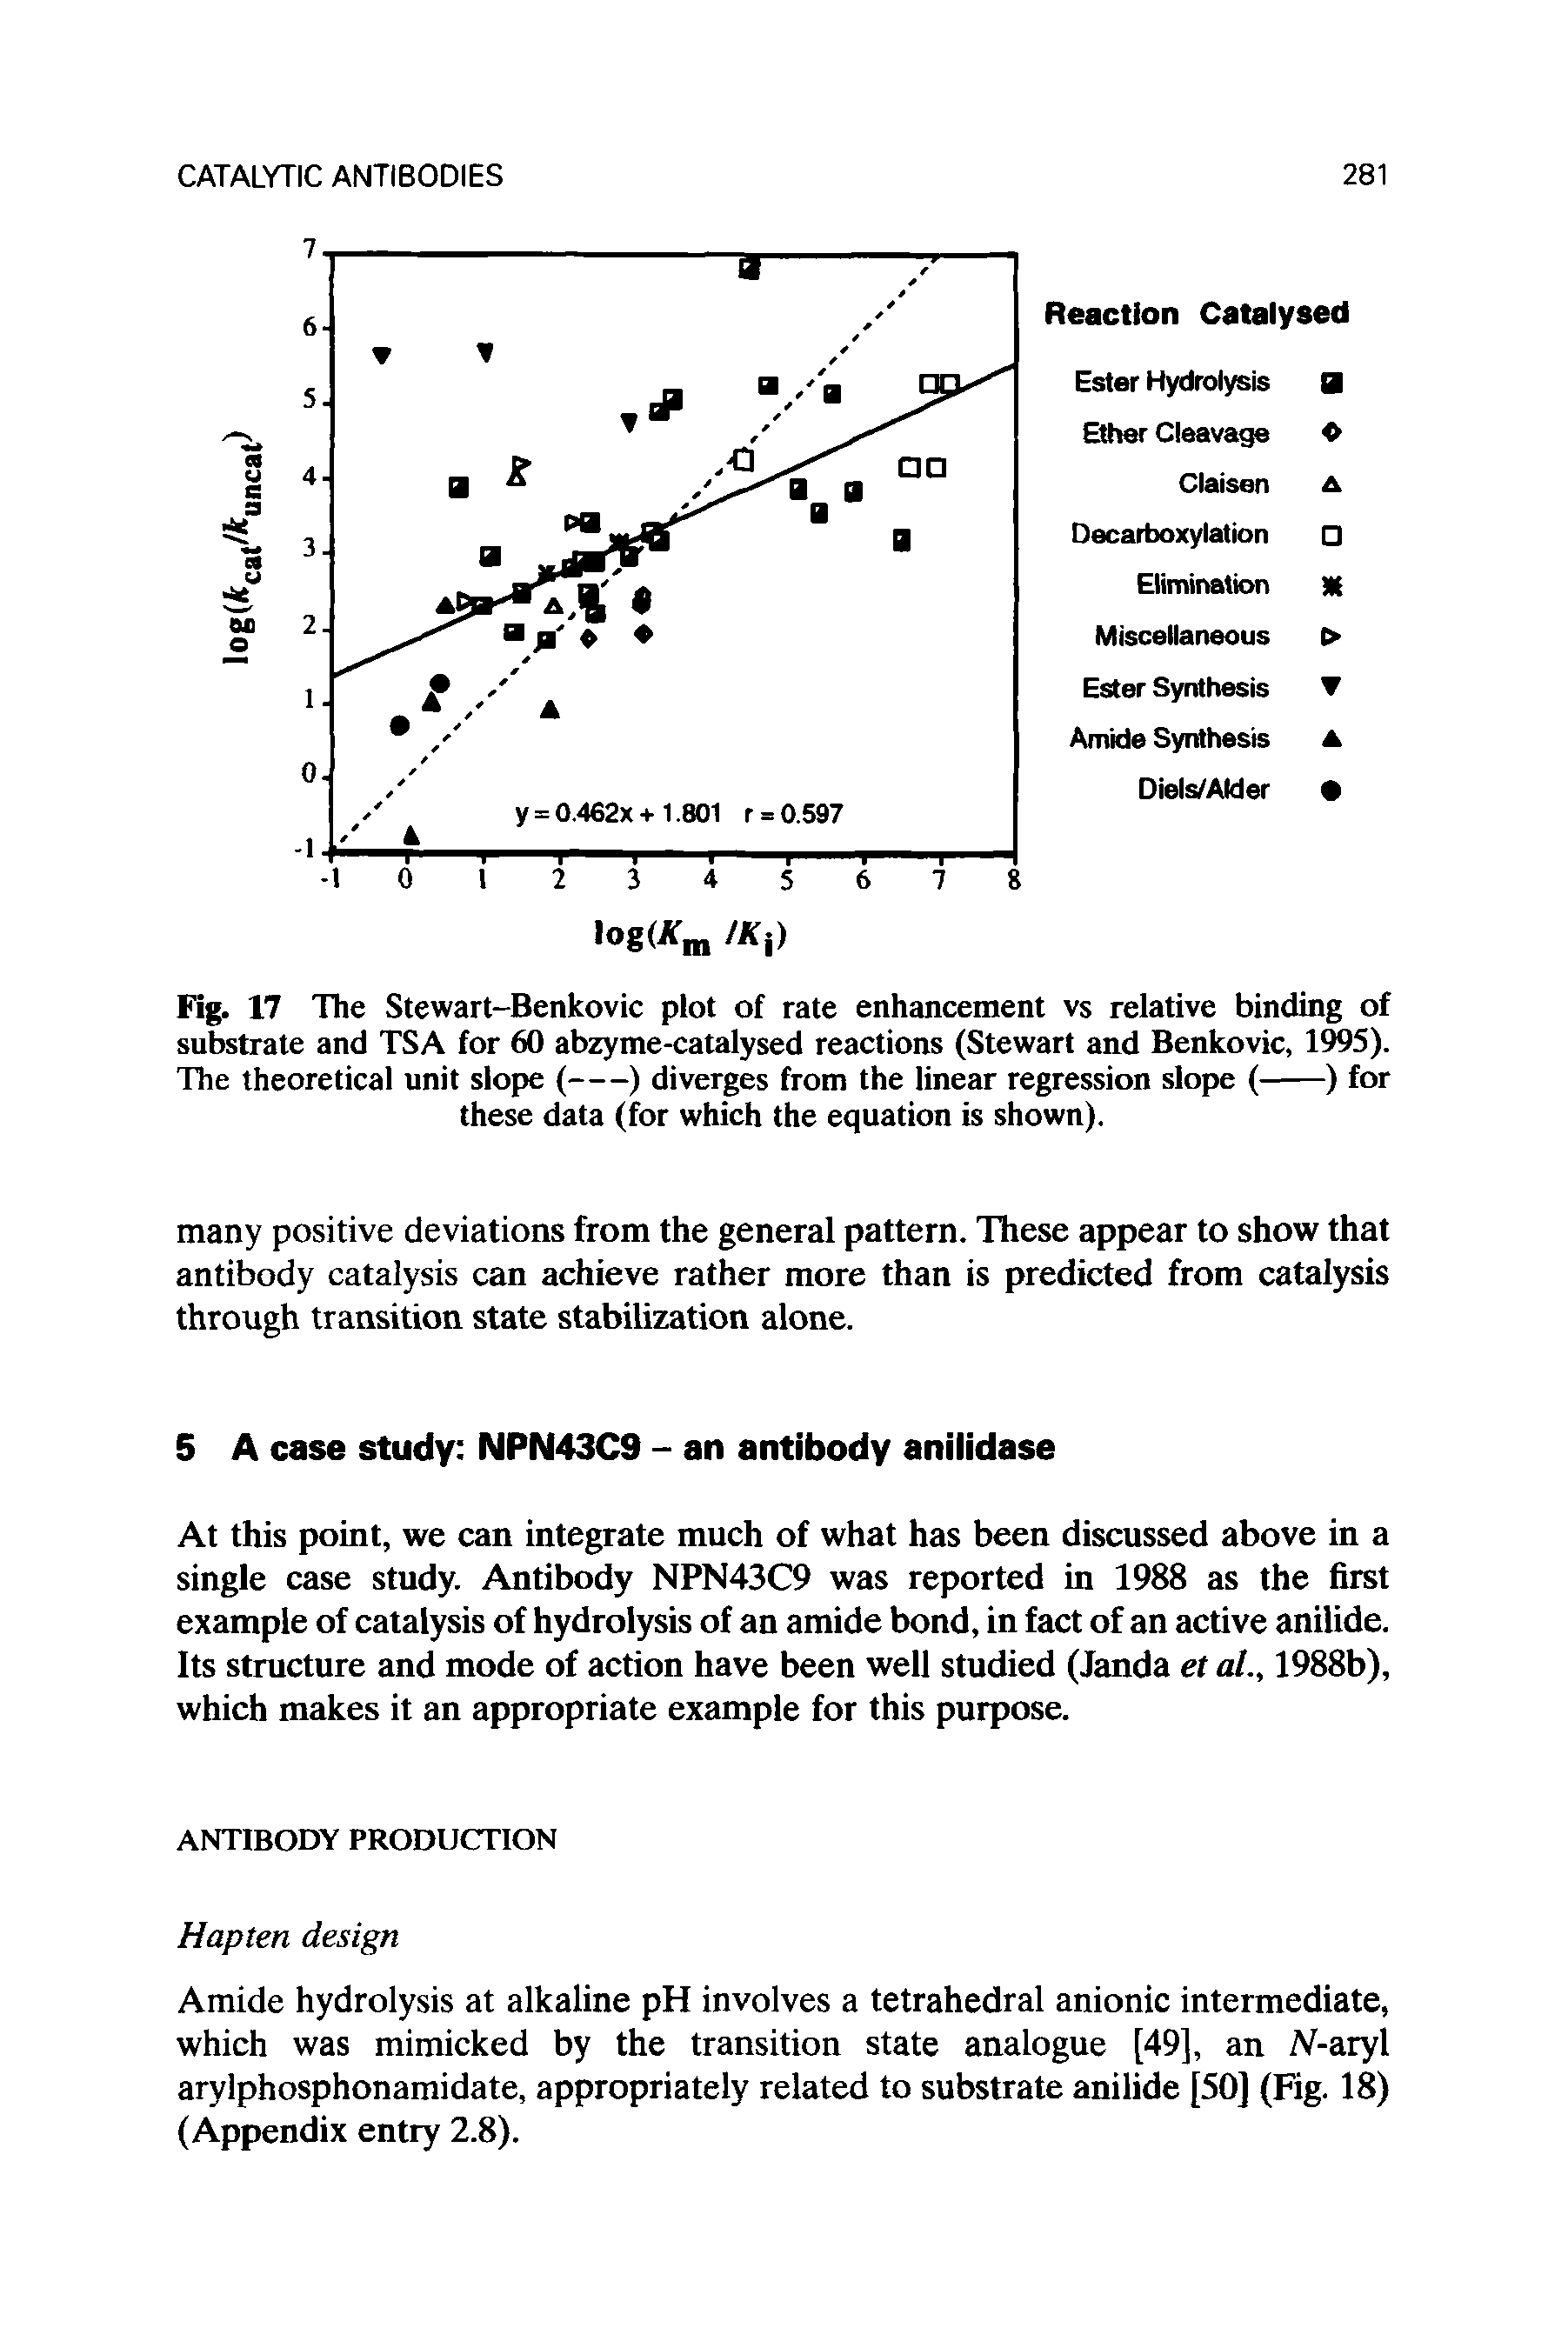 Fig. 17 The Stewart-Benkovic plot of rate enhancement vs relative binding of substrate and TSA for 60 abzyme-catalysed reactions (Stewart and Benkovic, 1995).